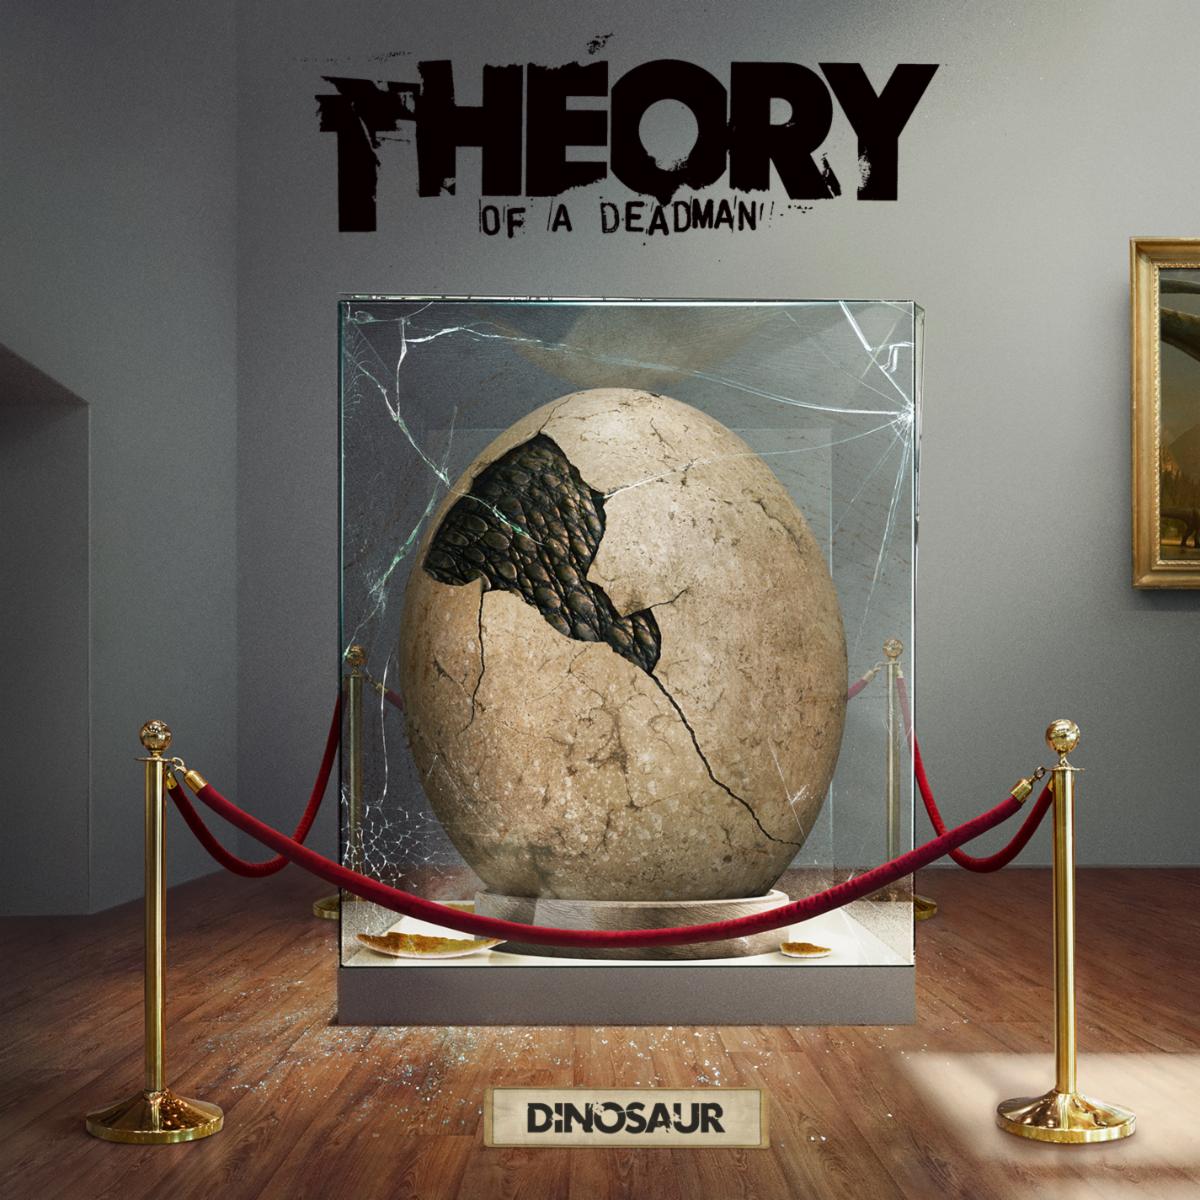 Theory Of A Deadman - New Album 'Dinosaur' Out Now!